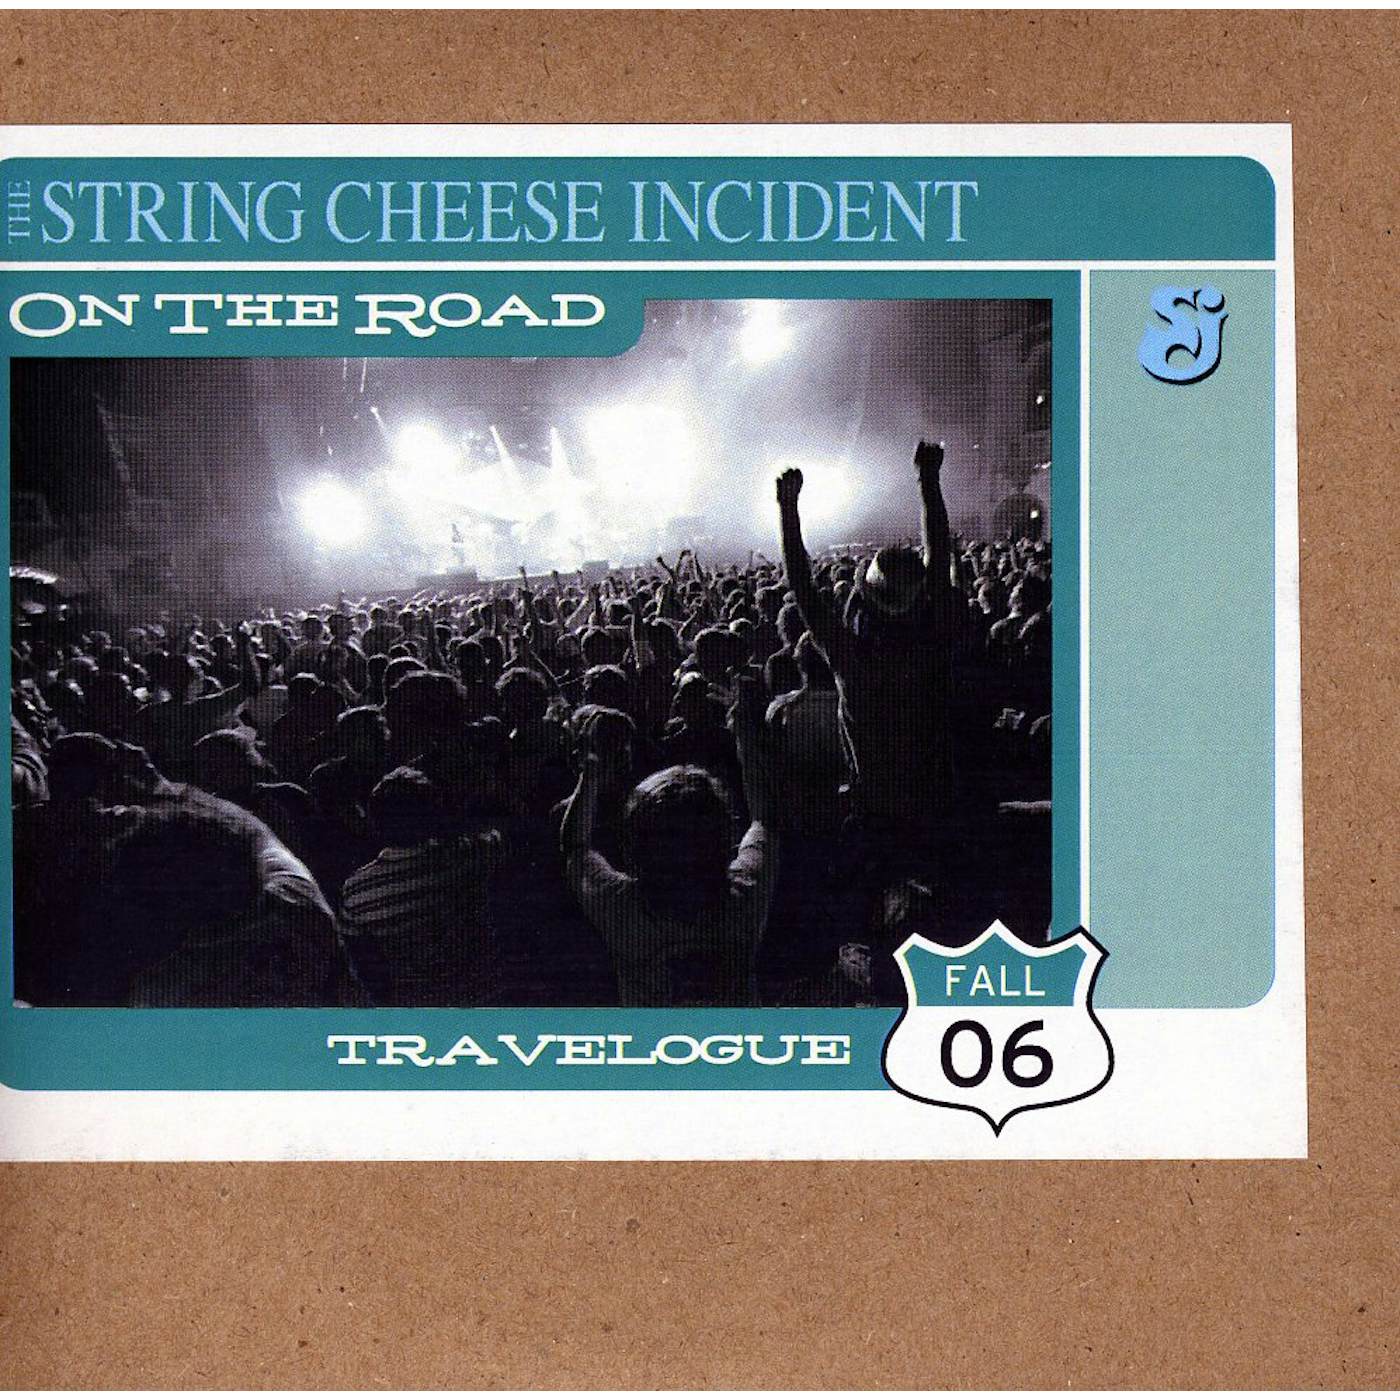 The String Cheese Incident ON THE ROAD: TRAVELOGUE FALL 2006 CD